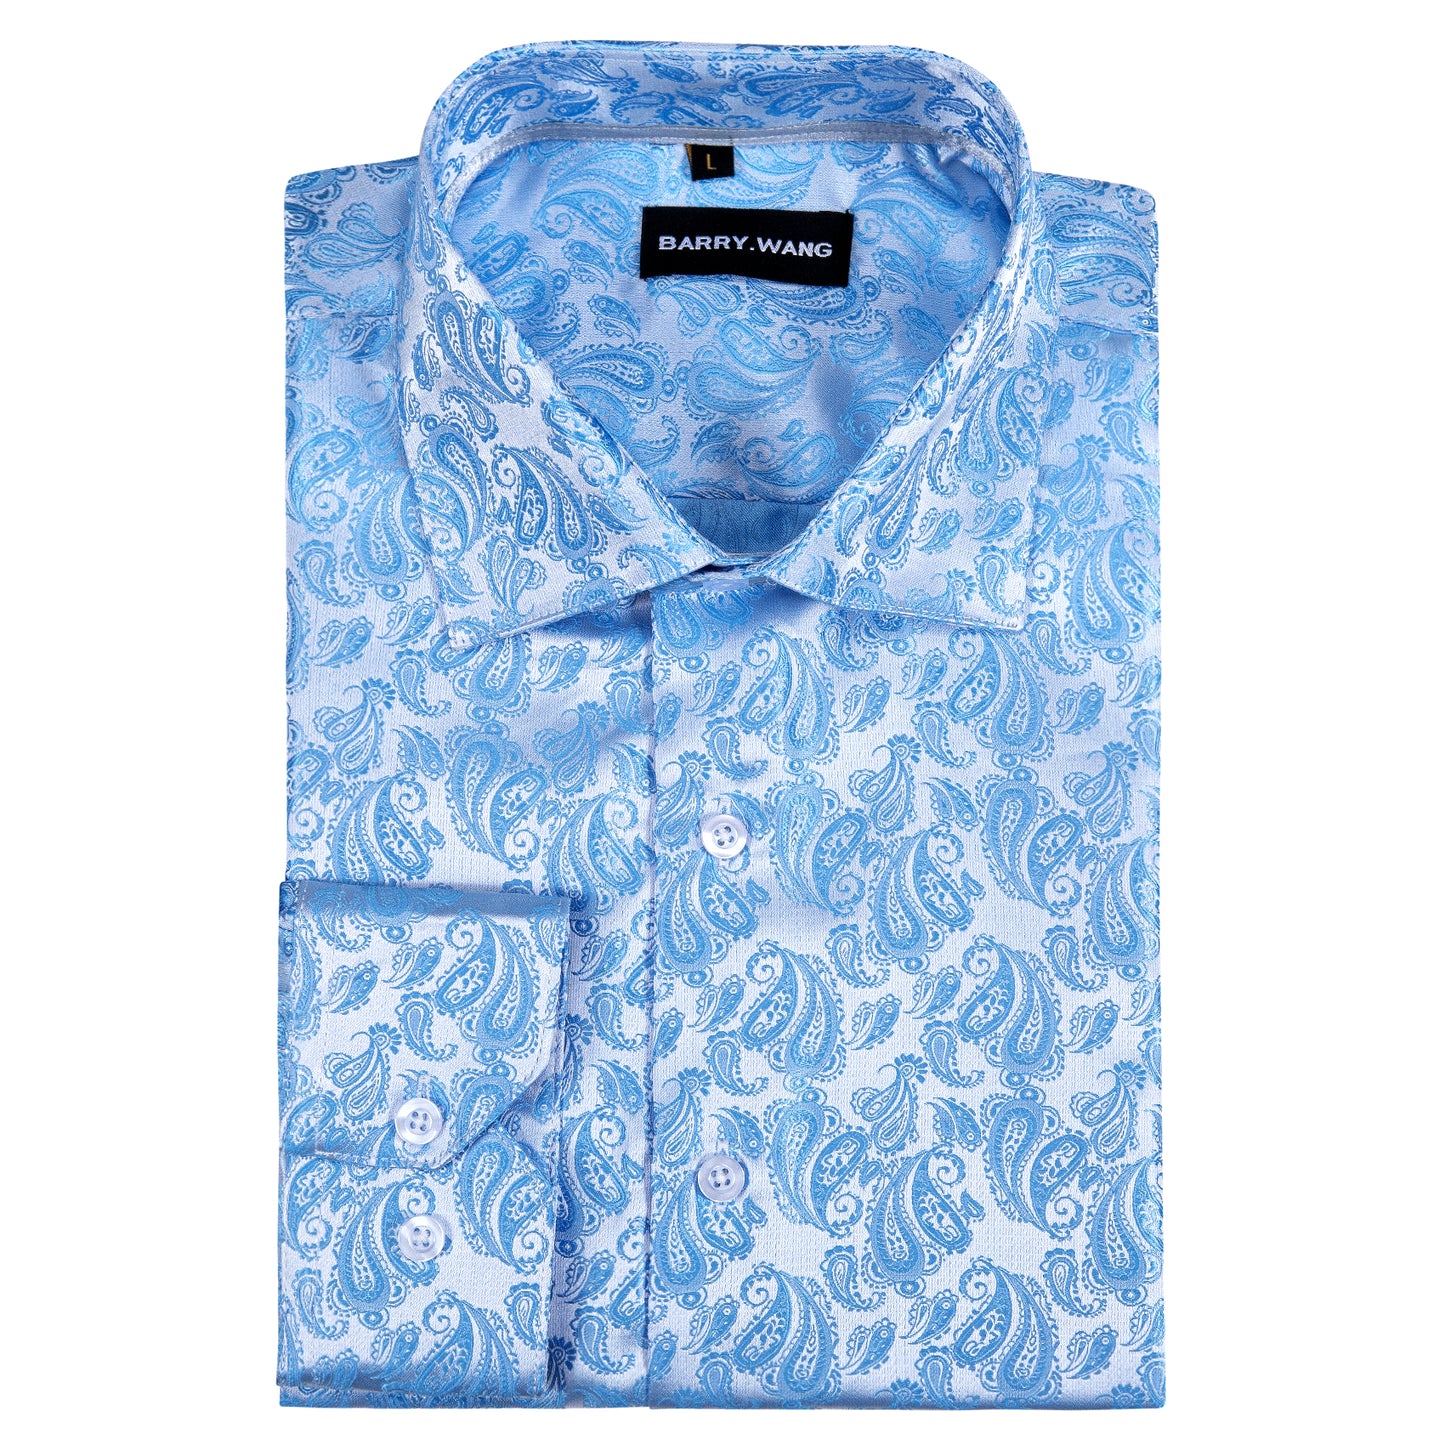 Novelty Silky Shirt - Icy Nuts